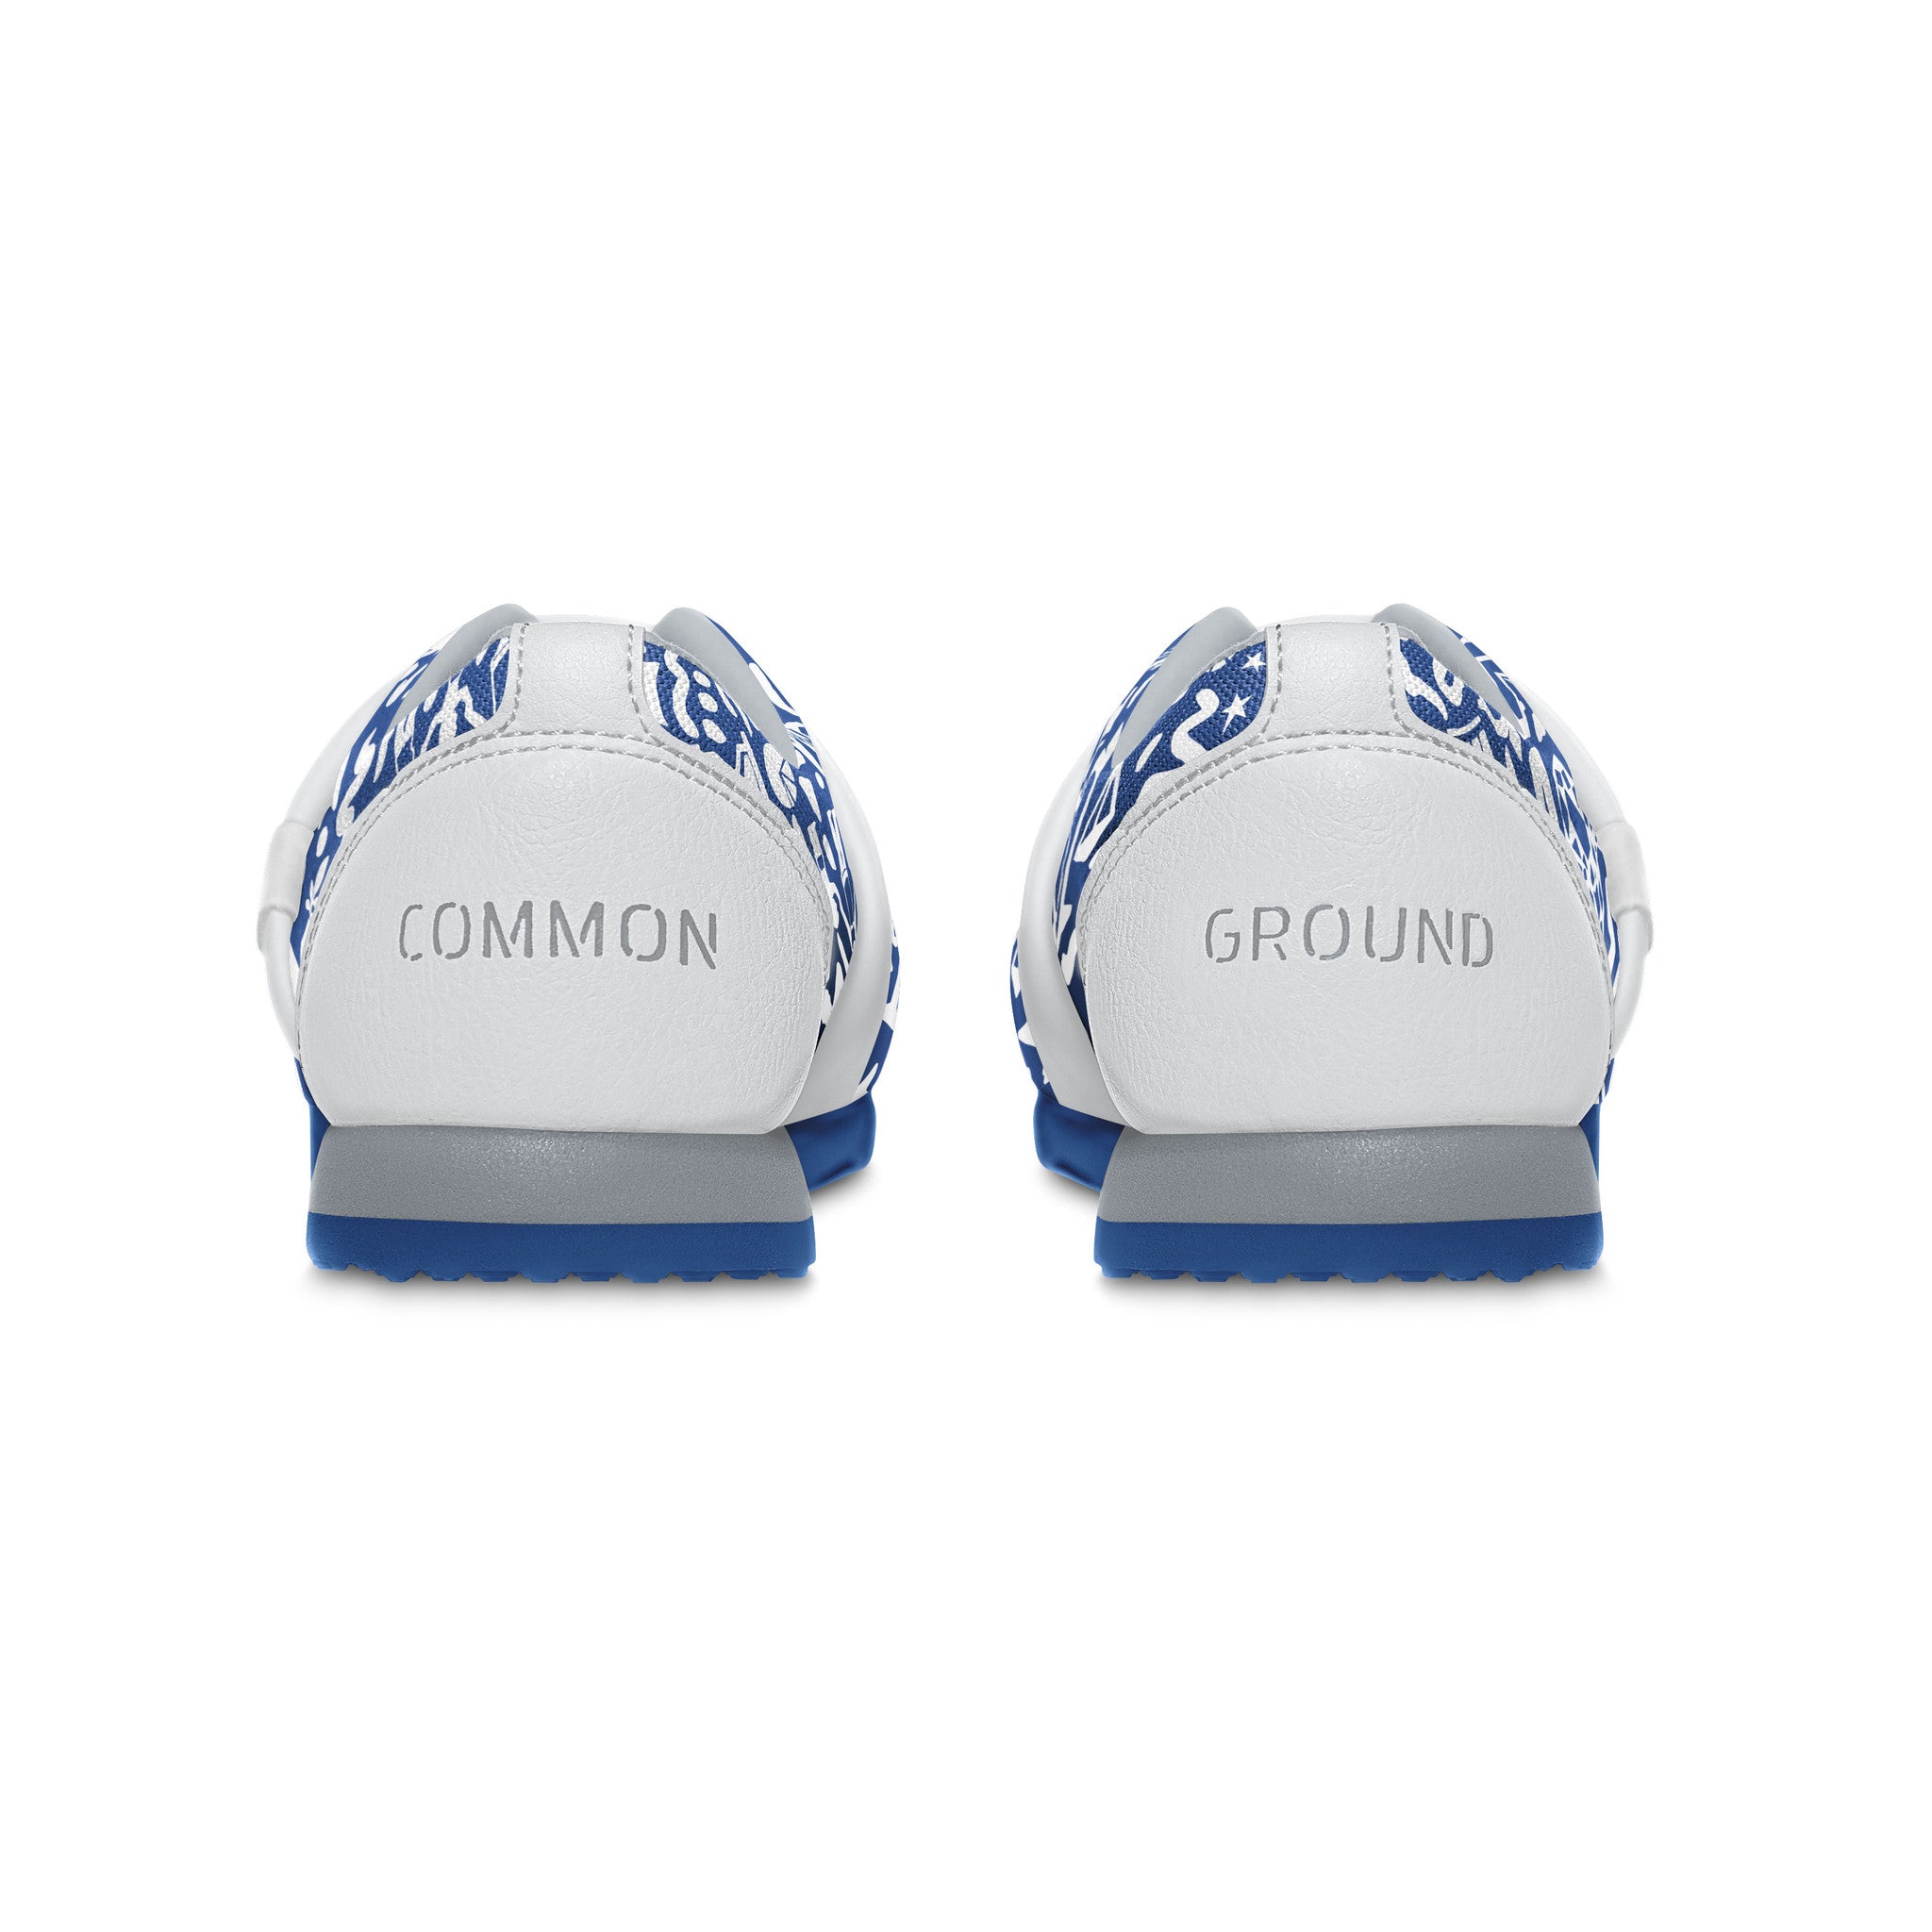 Strong_Blue - Common Ground Footwear Shoes Heel View